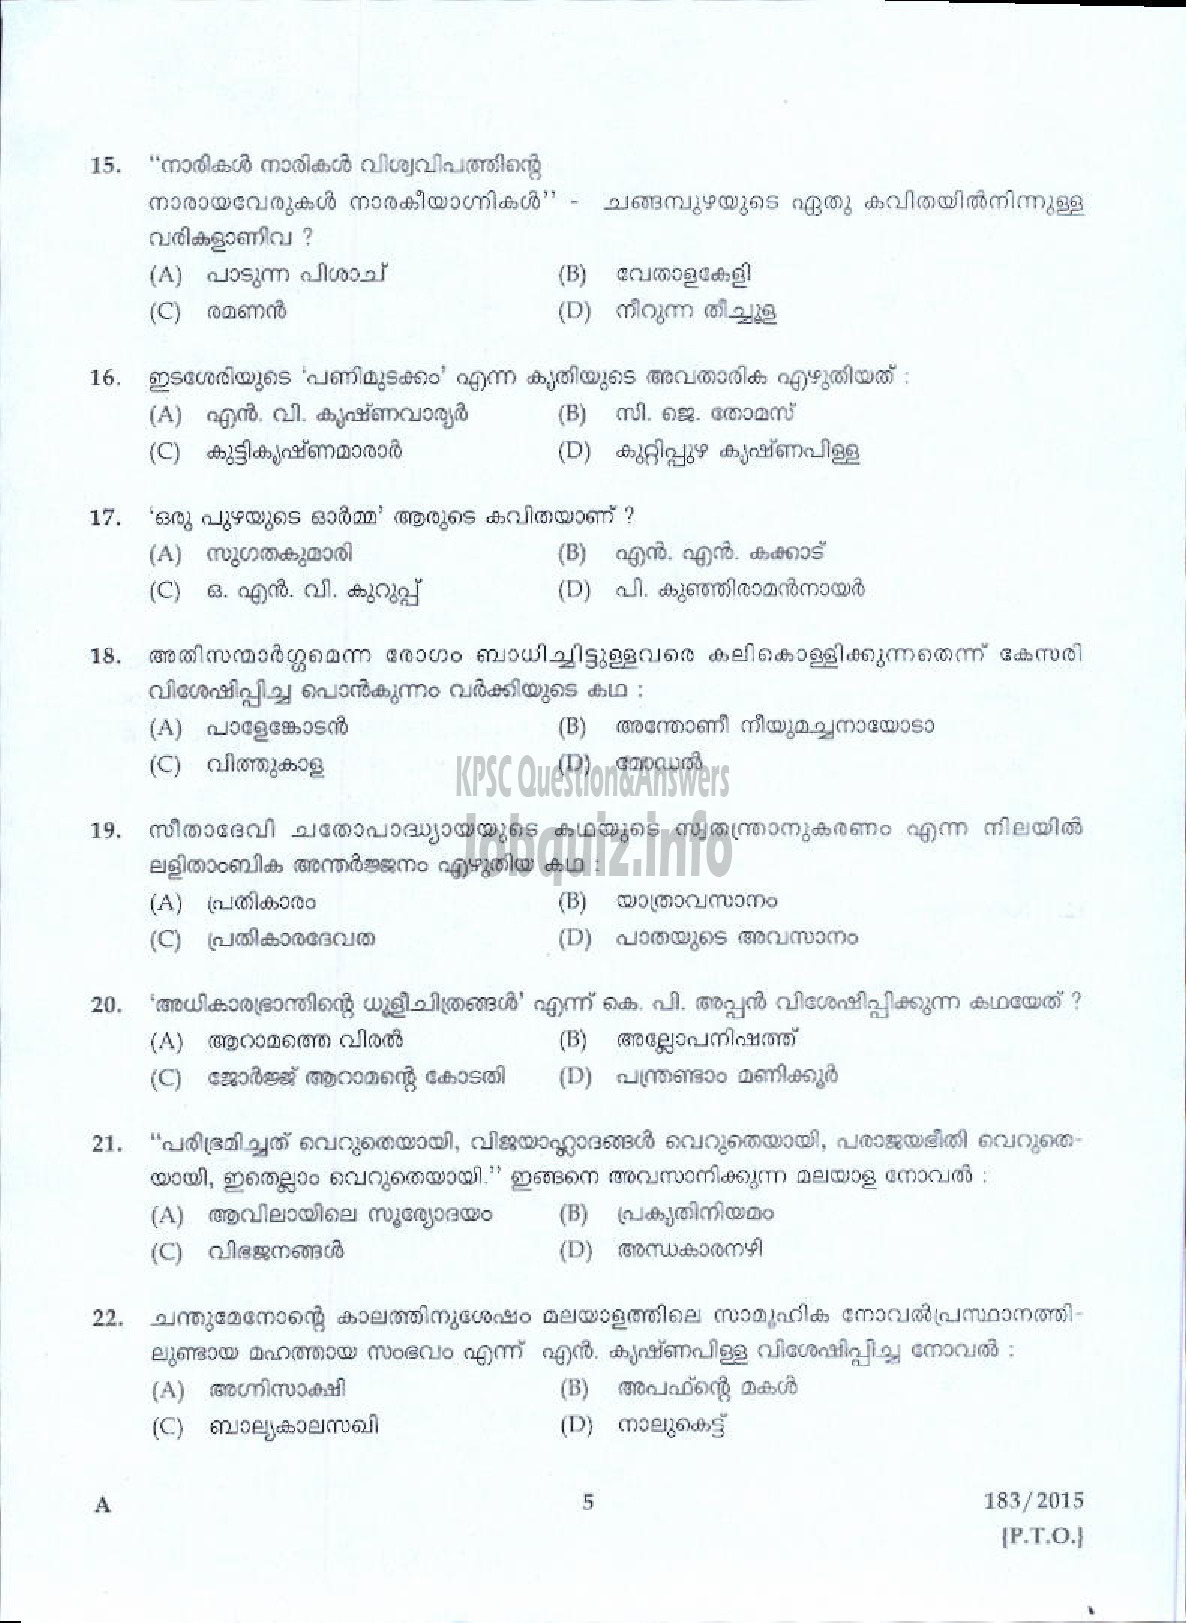 Kerala PSC Question Paper - LECTURER IN MALAYALAM COLLEGIATE EDUCATION-3